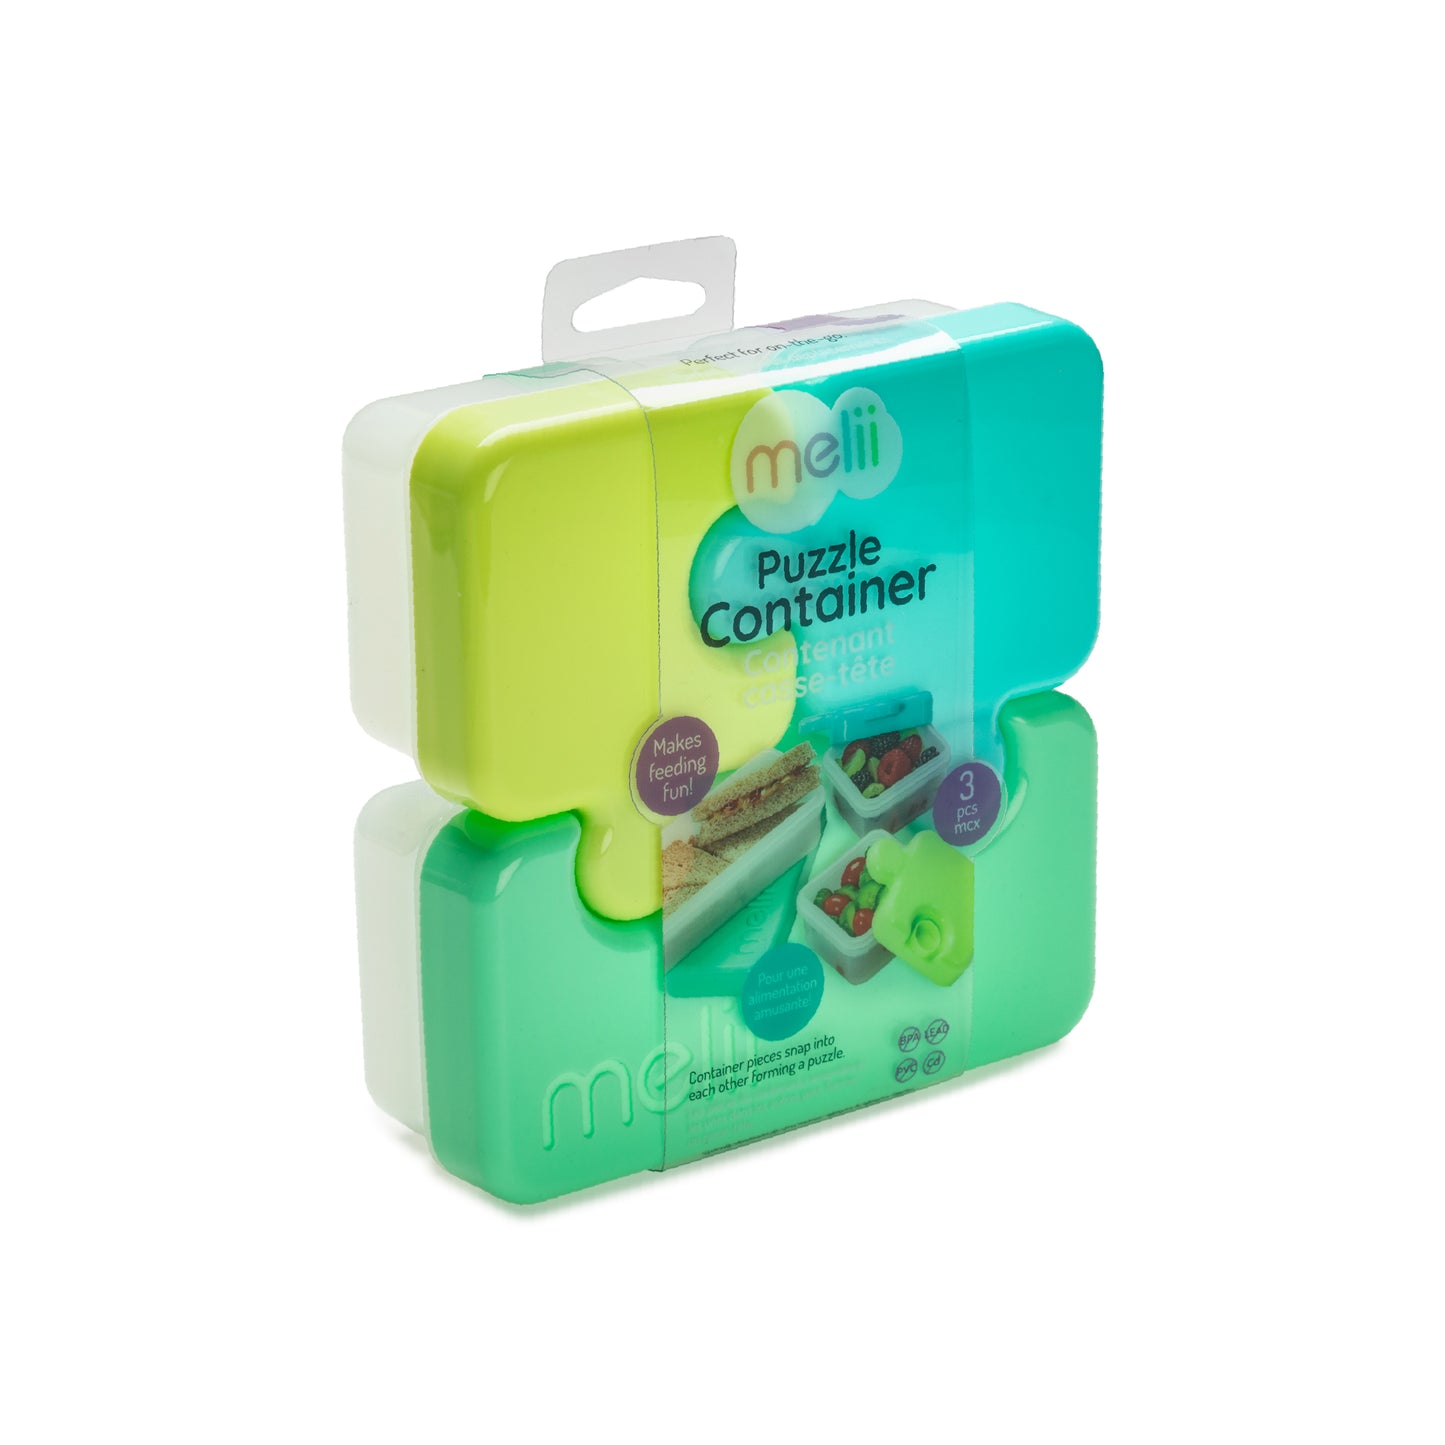 Melii Puzzle Bento Box - Fun 3-Compartment Food Storage Container for Kids and Adults - Leakproof, Microwave and Freezer Safe, Encourages Independent Feeding